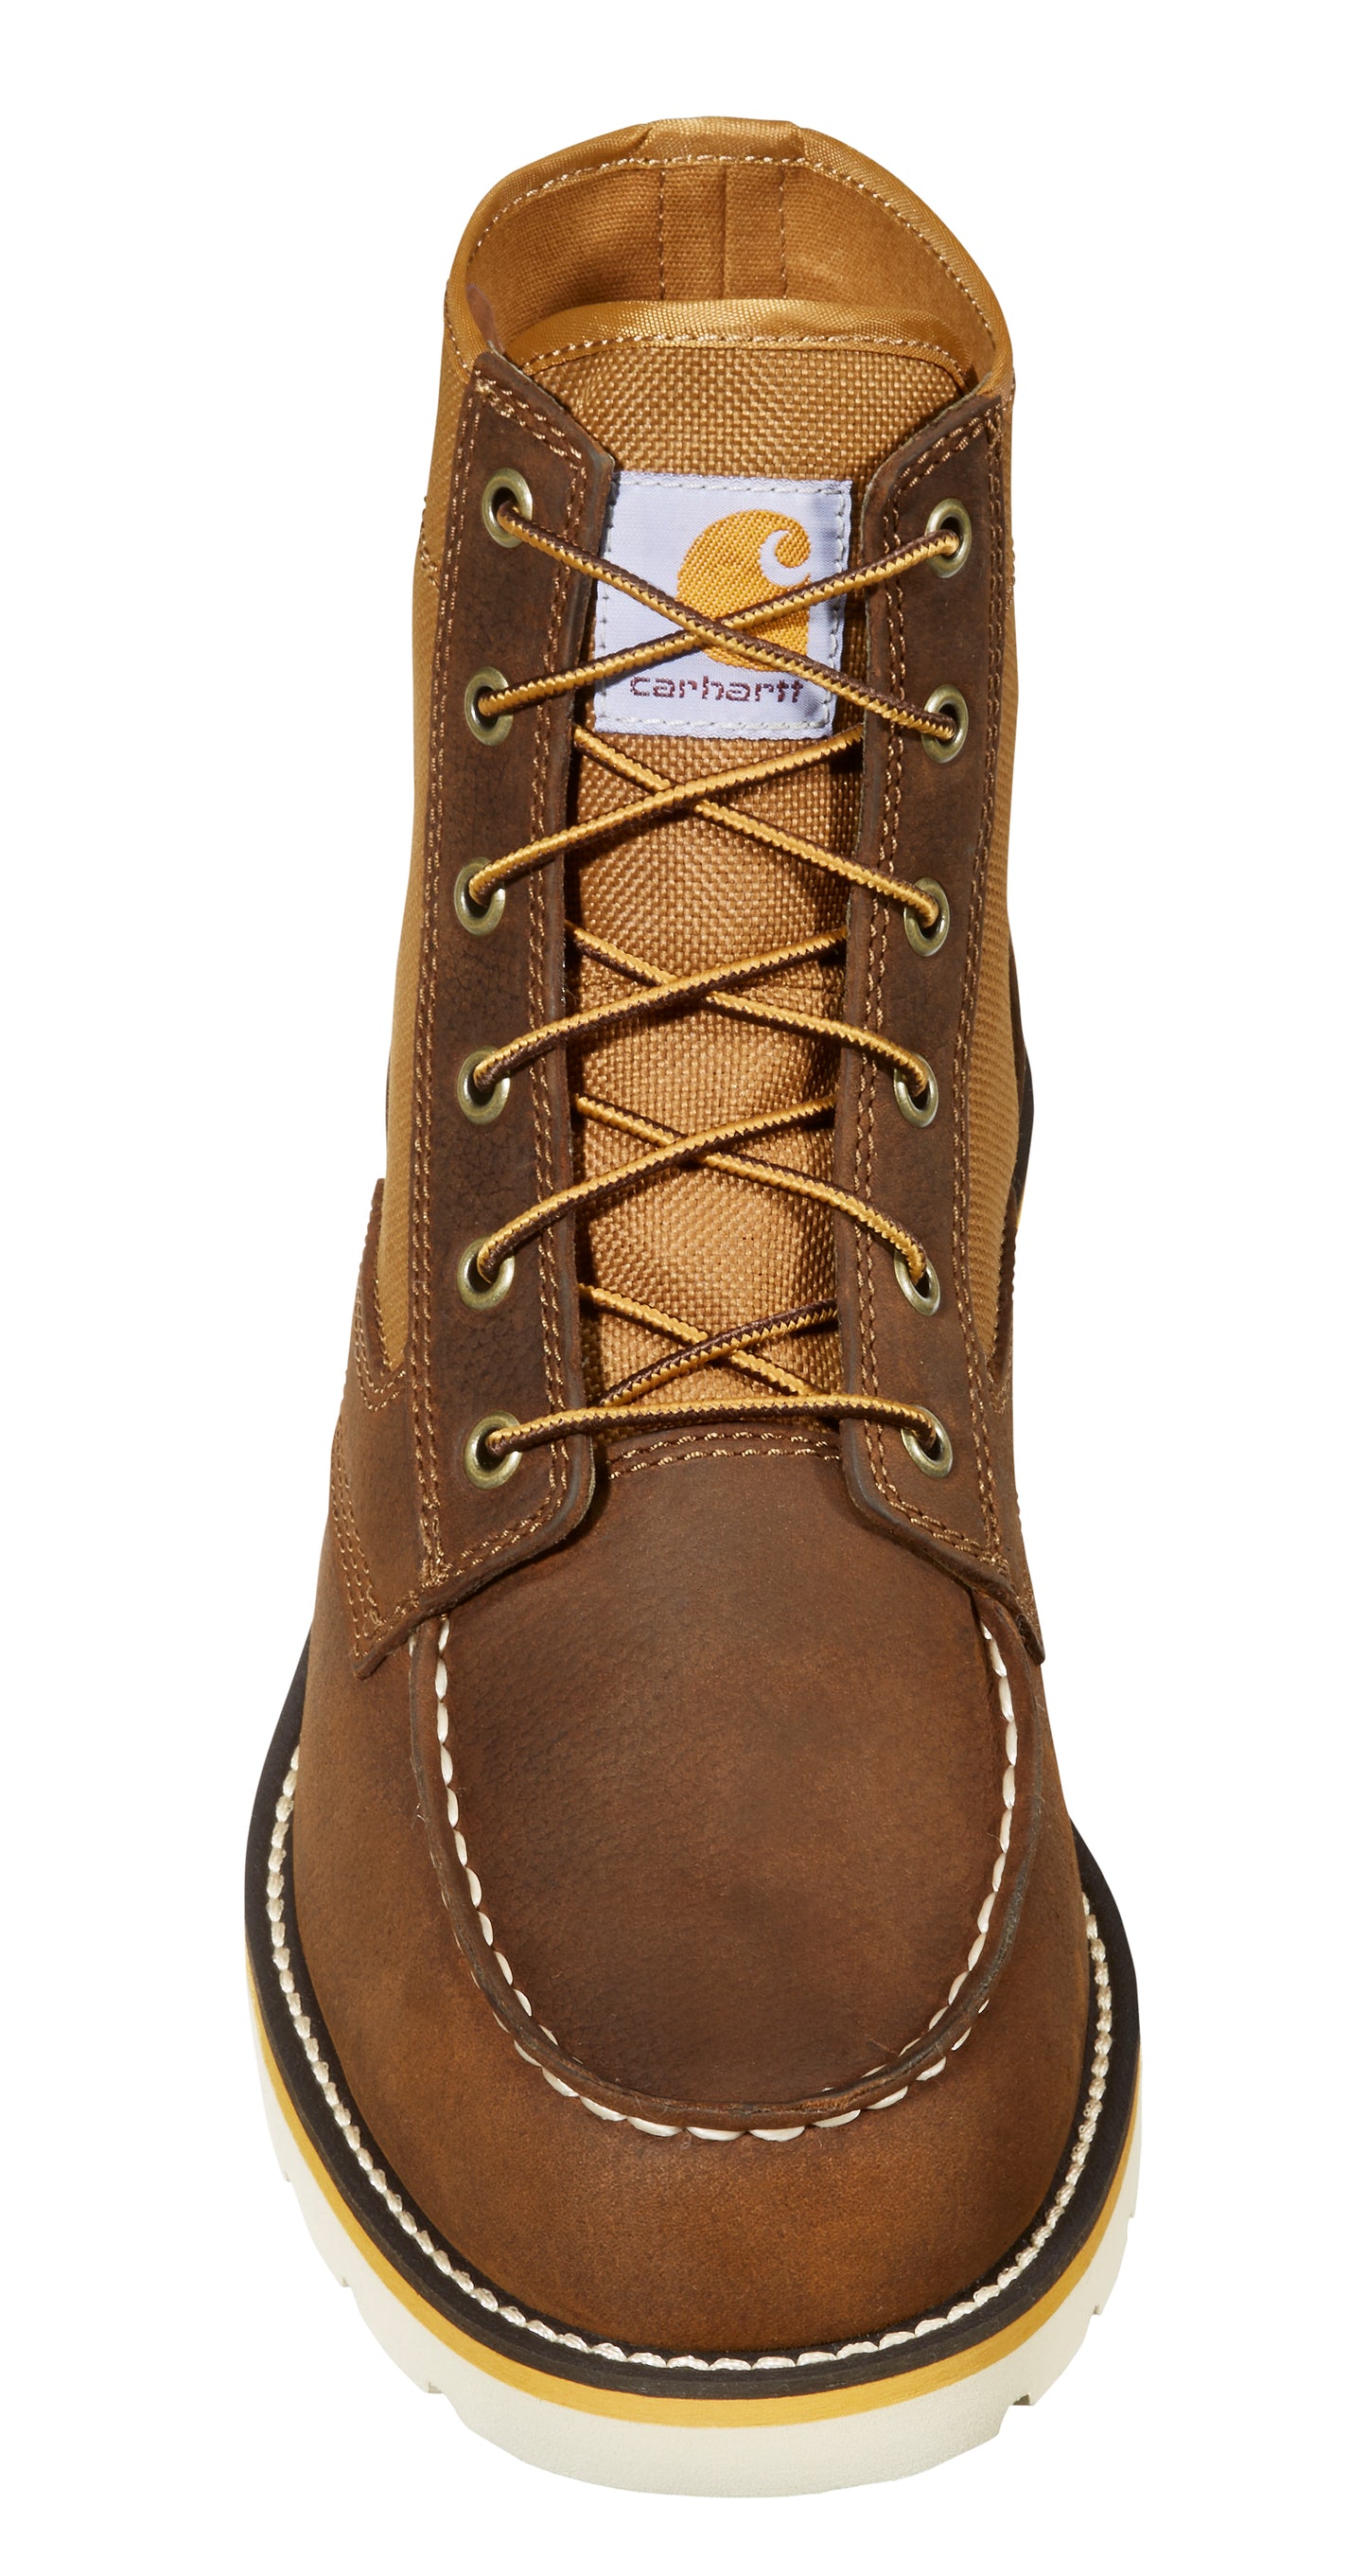 Carhartt Men's 6-Inch Moc Toe Non-Safety Wedge Boot